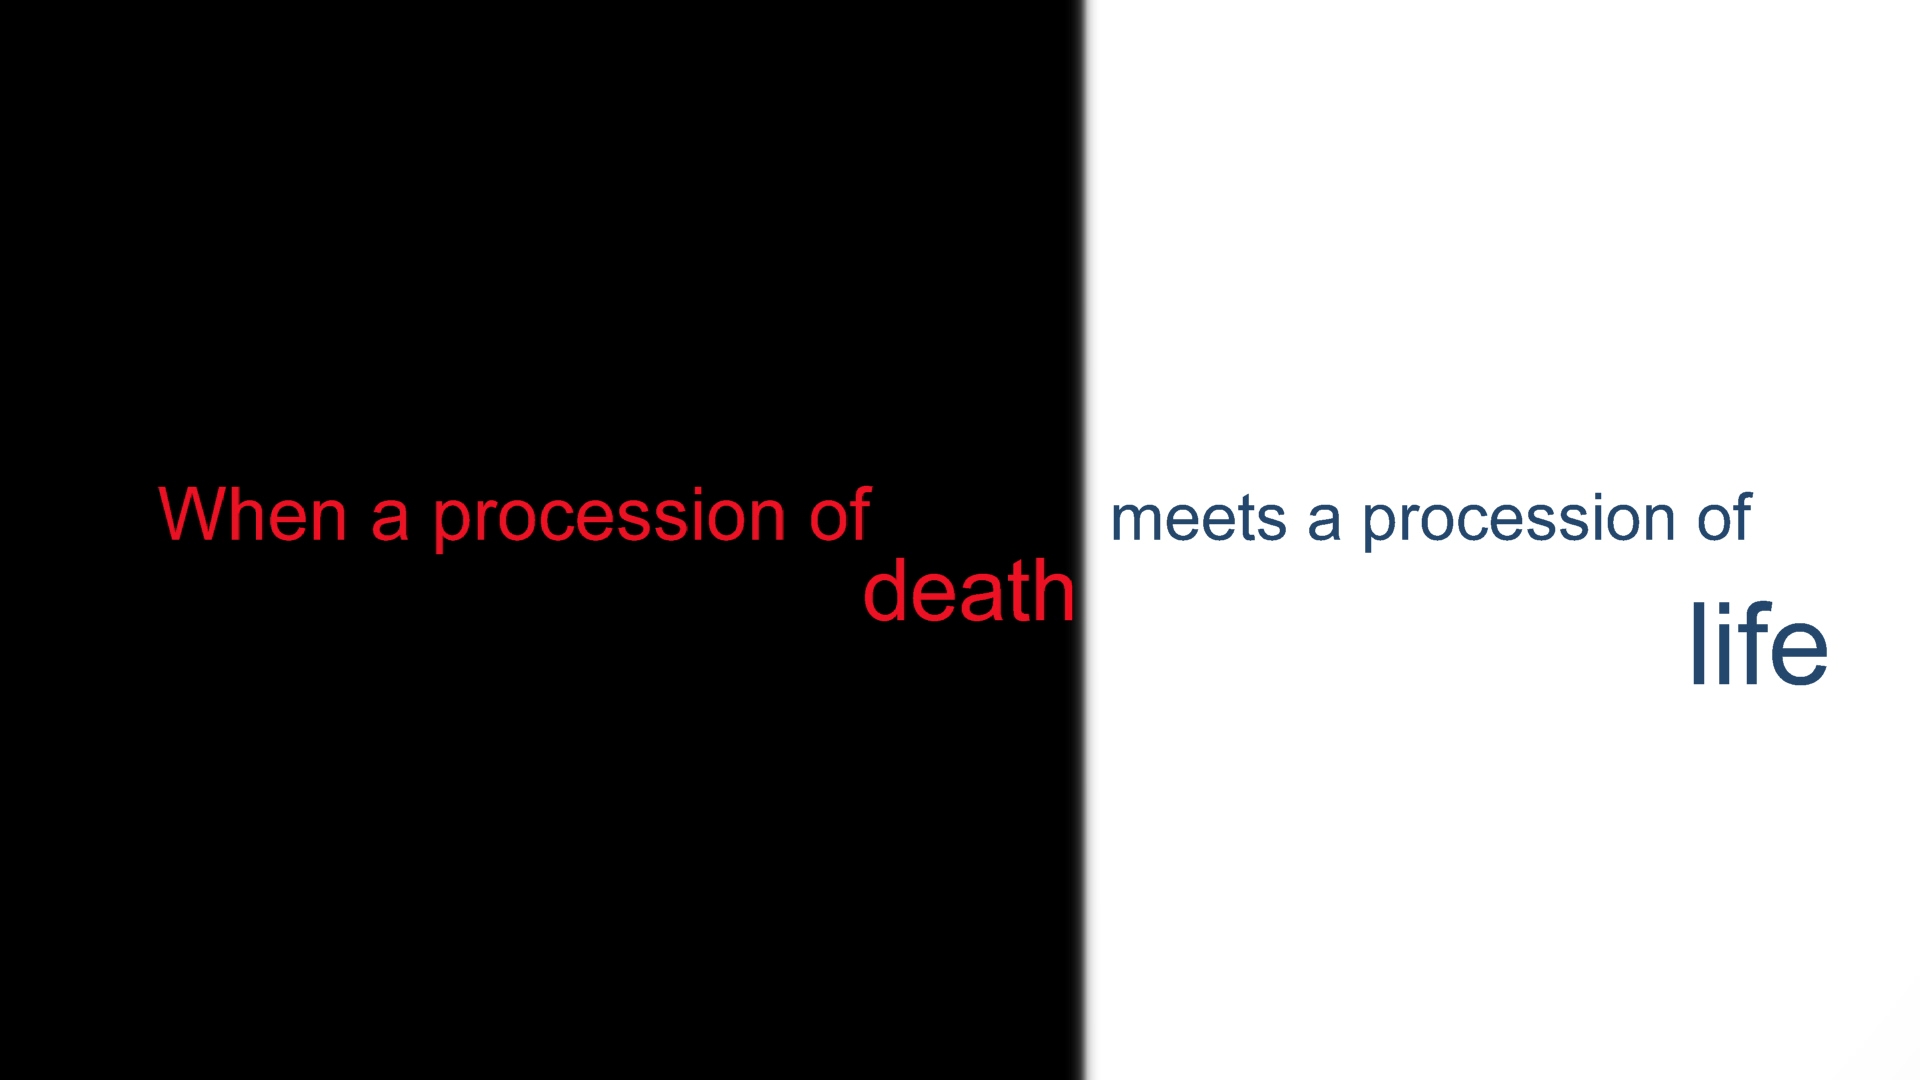 Procession of Death Meets a Procession of Life